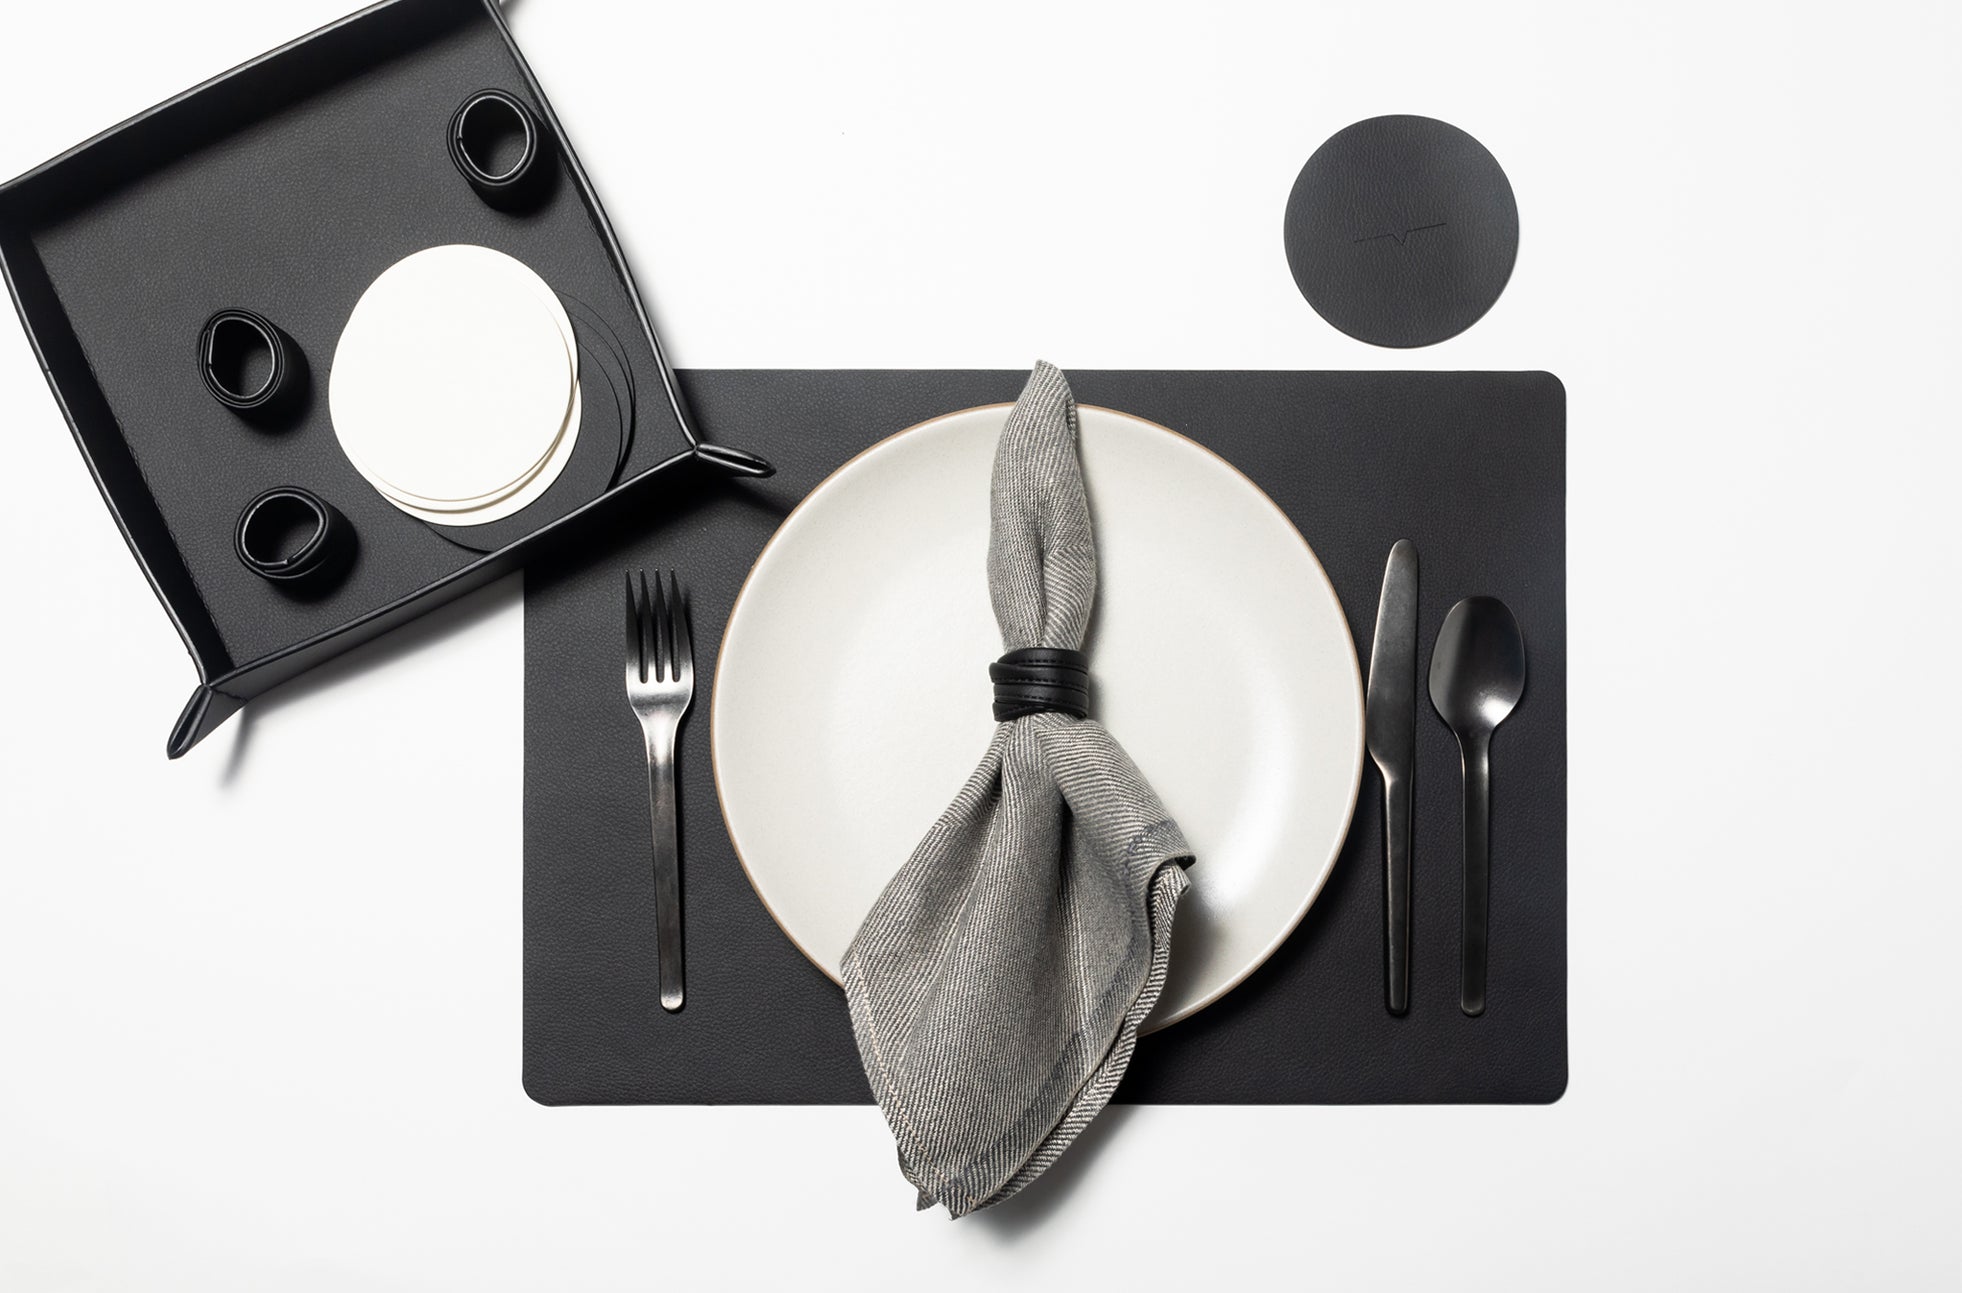 The Placemat Set - Sample Sale in Technik in Black & White image 4